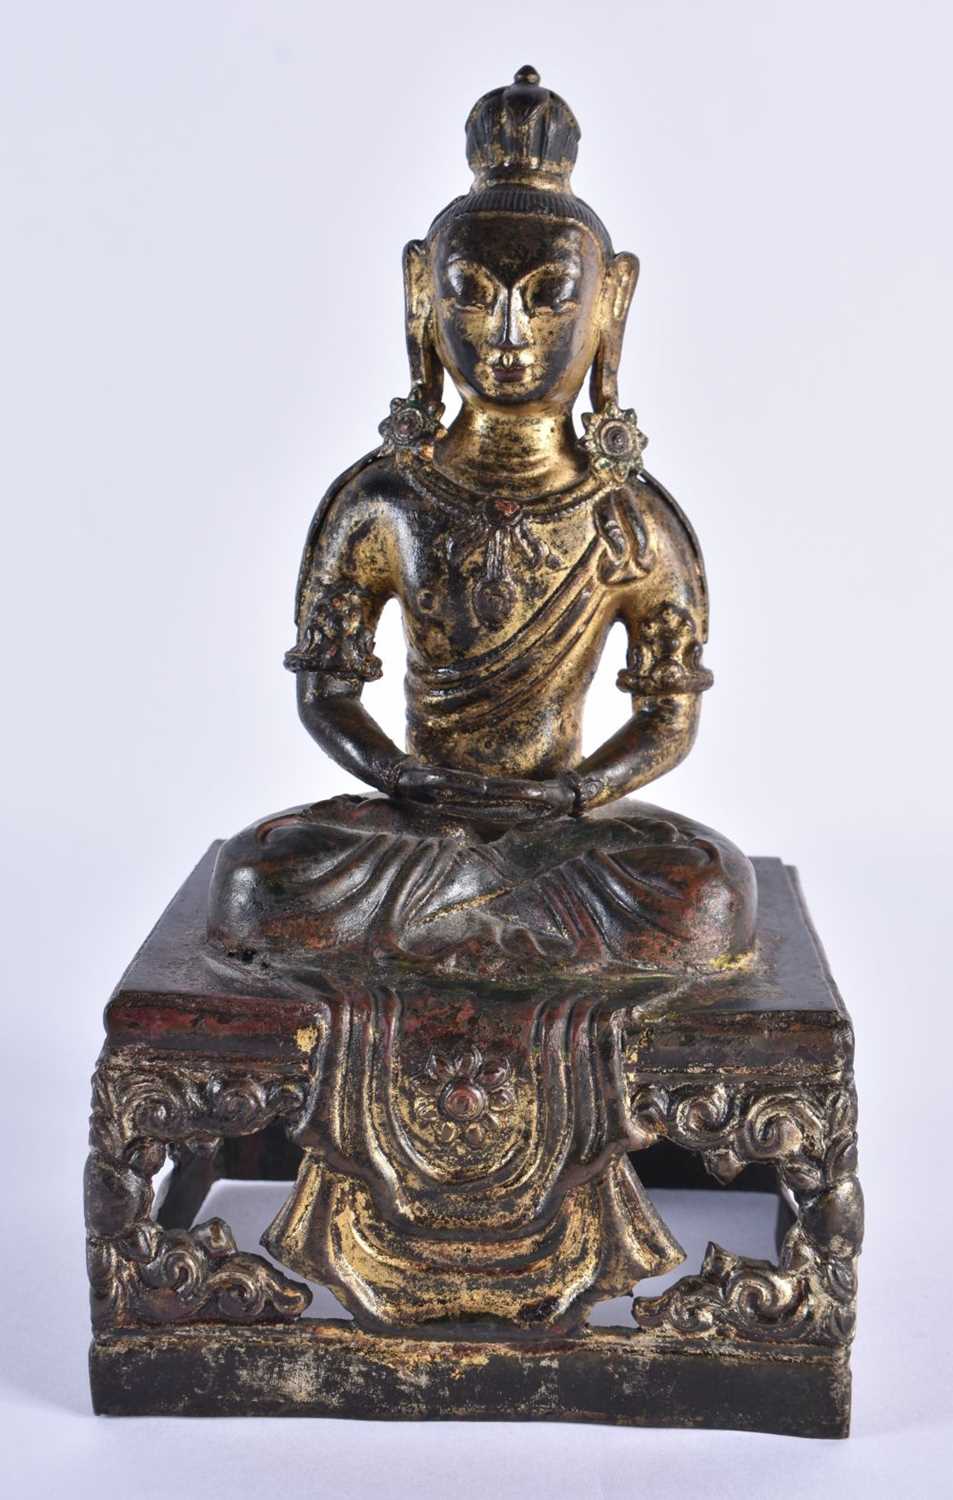 AN 18TH CENTURY CHINESE LACQUERED BRONZE FIGURE OF A BUDDHA Qianlong. 21 cm x 10 cm.